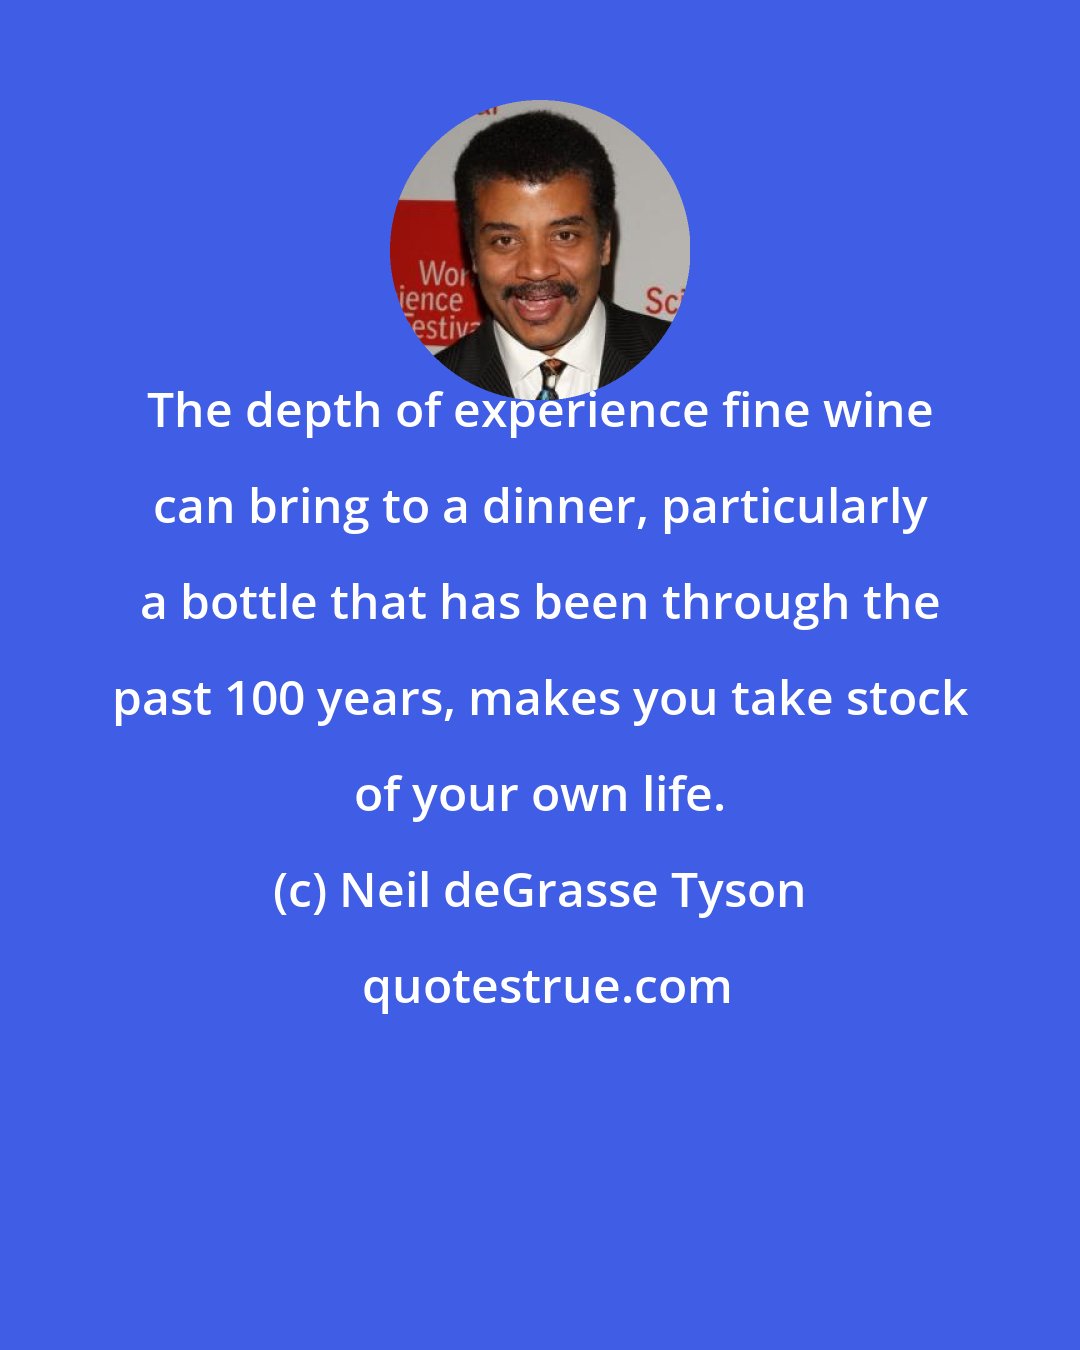 Neil deGrasse Tyson: The depth of experience fine wine can bring to a dinner, particularly a bottle that has been through the past 100 years, makes you take stock of your own life.